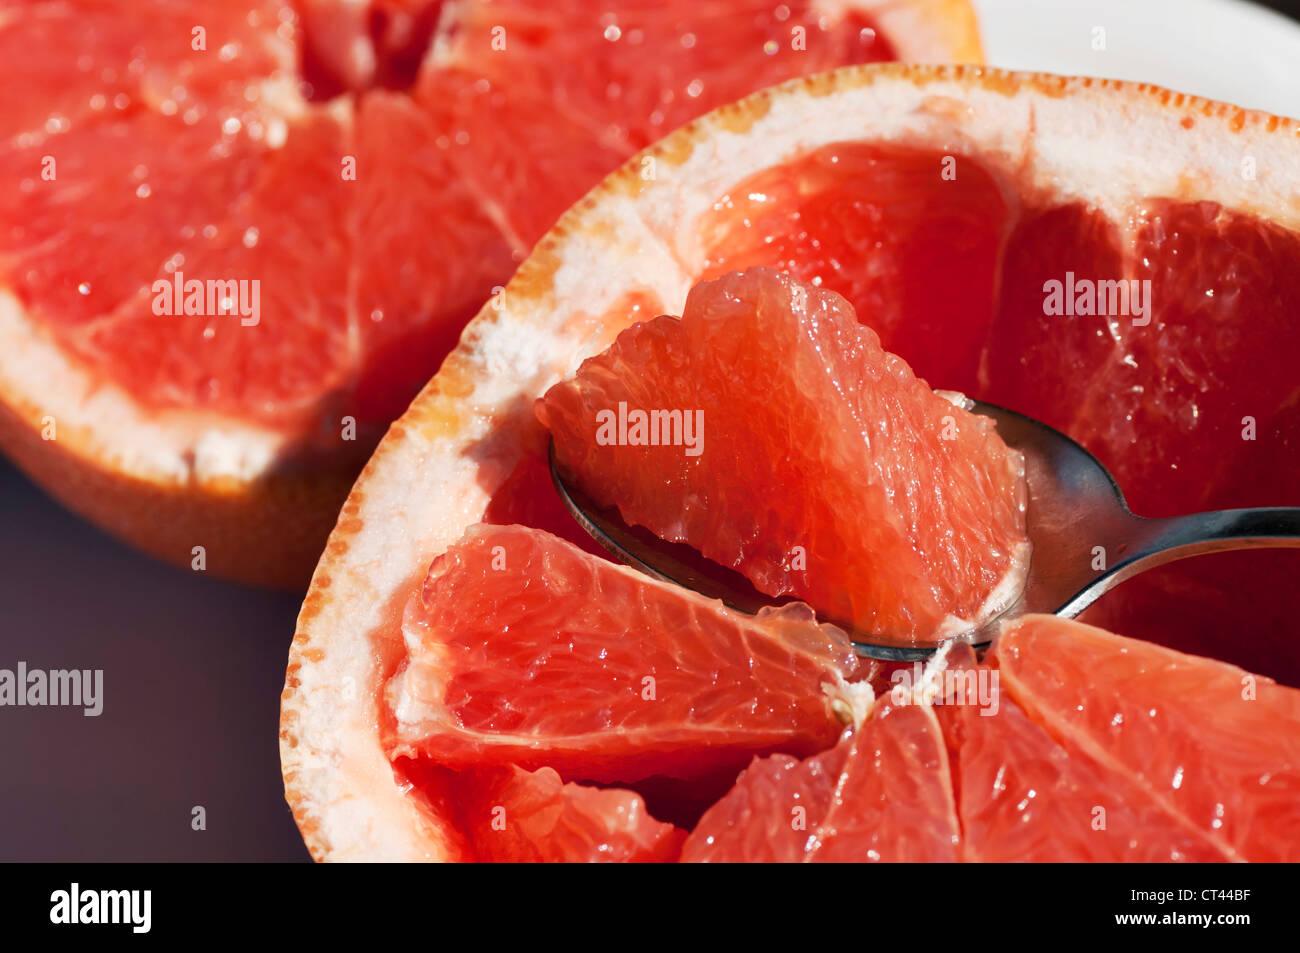 Closeup view of grapefruit halves with a spoon  holding a section ready for eating. Stock Photo